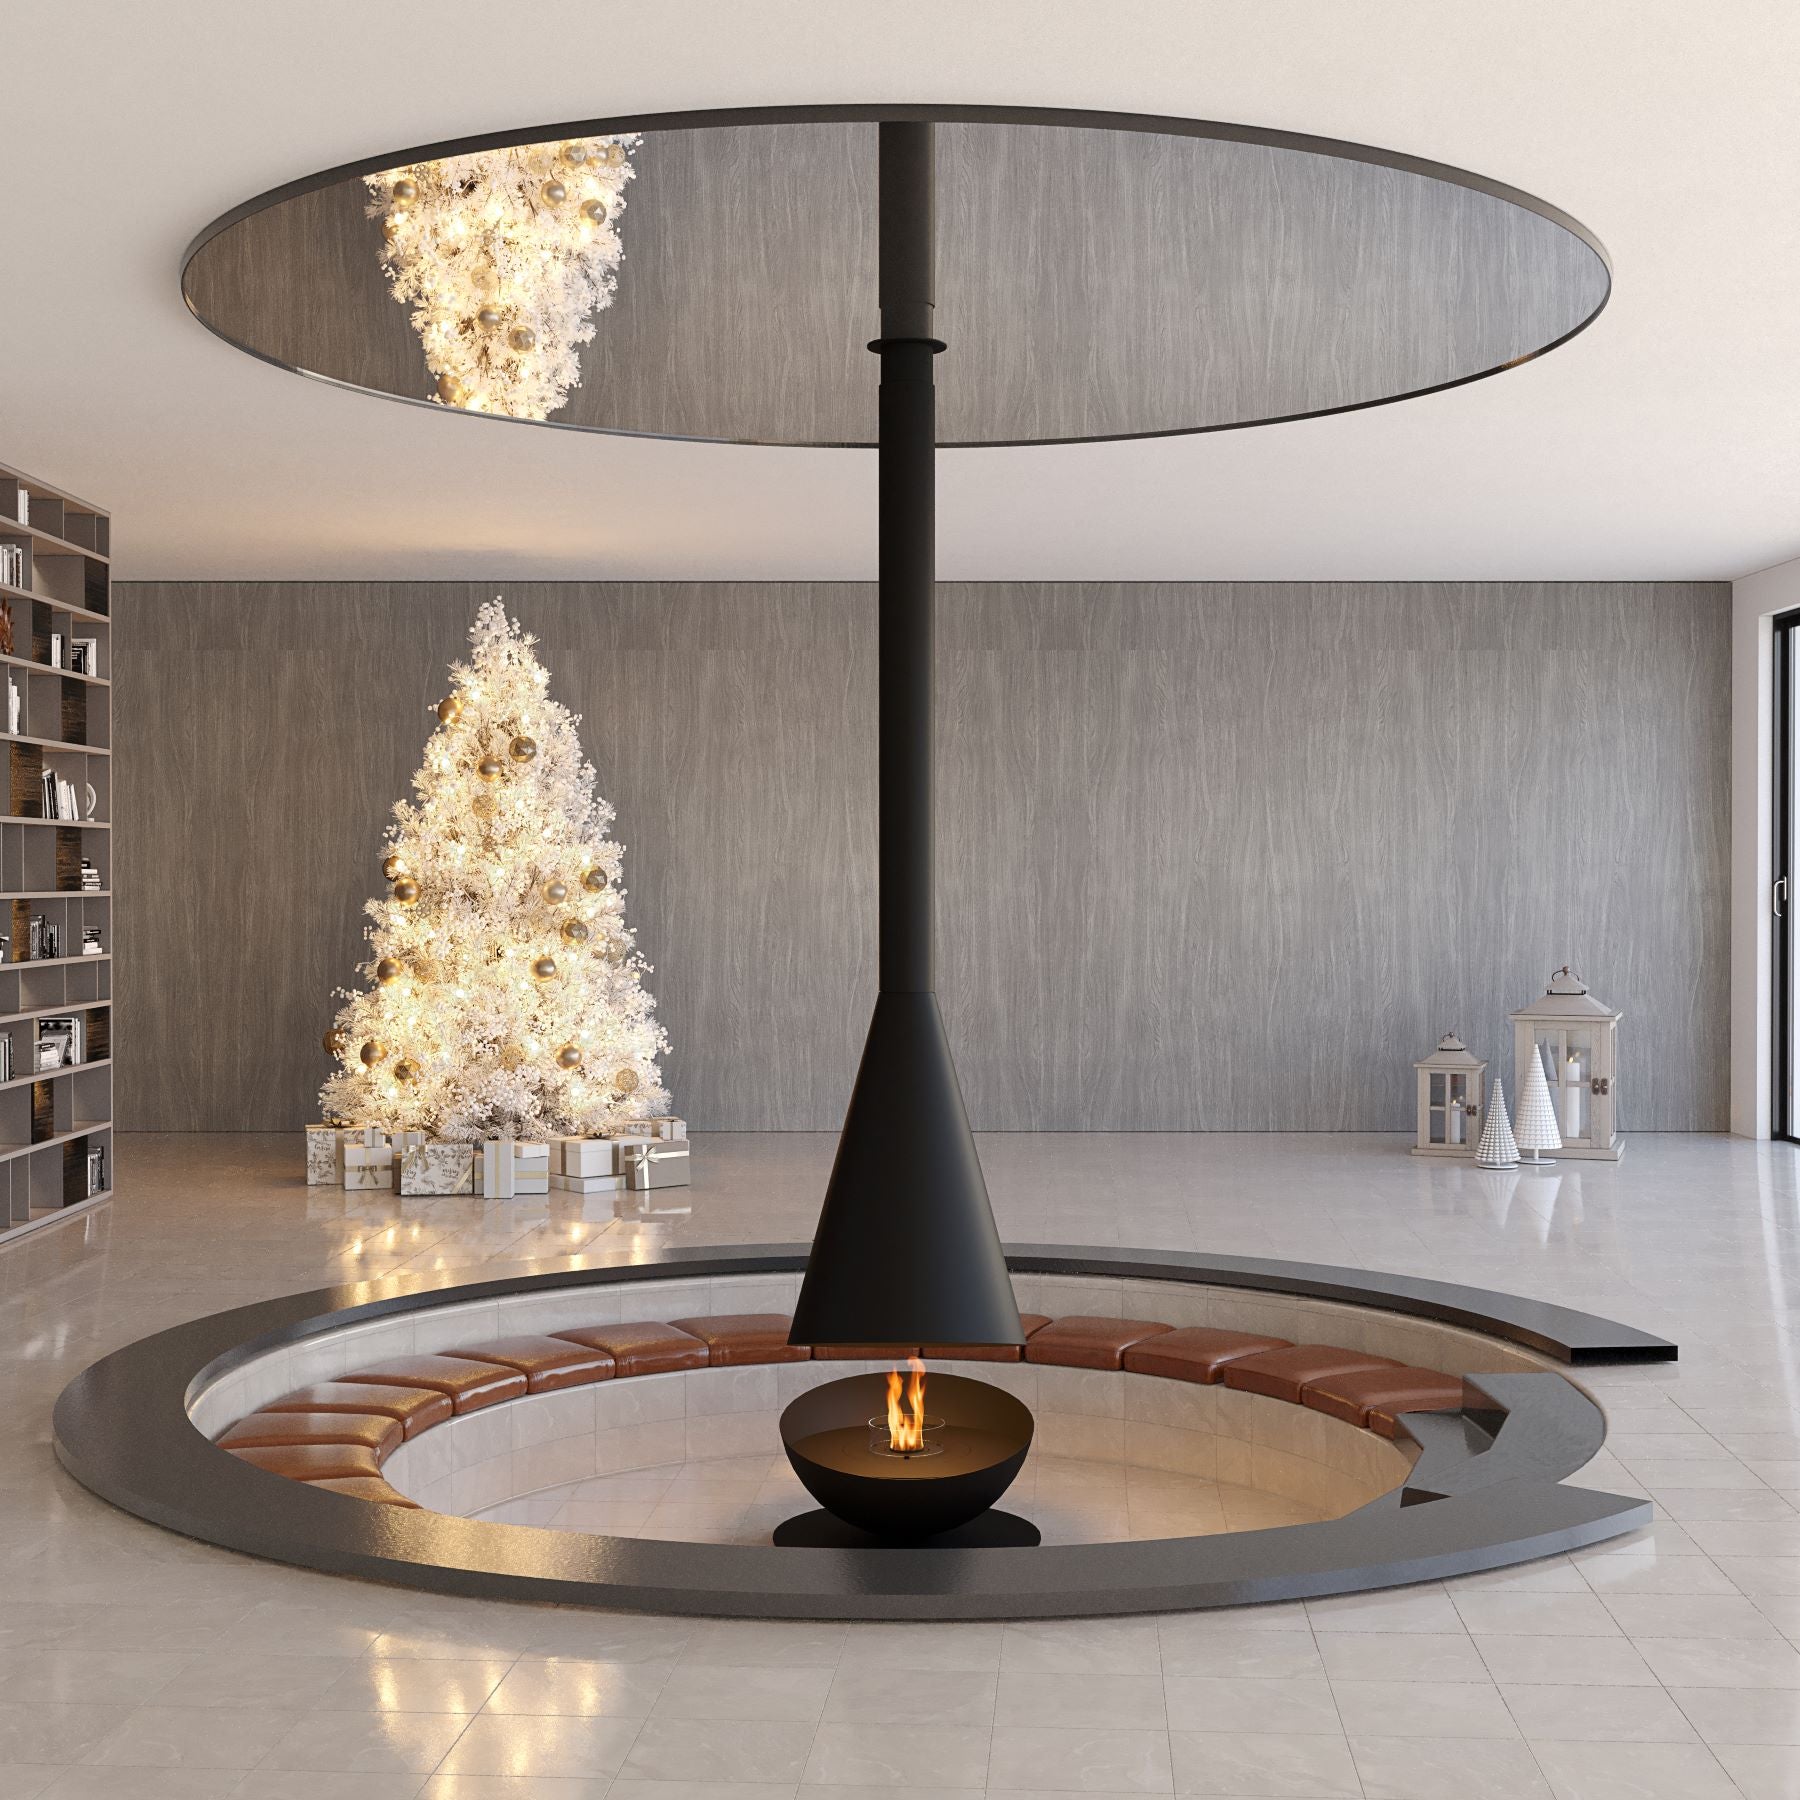 THALES Black in ultramodern living room with mirrored ceiling. Central focus in the middle of a sitting area with library and Christmas tree around